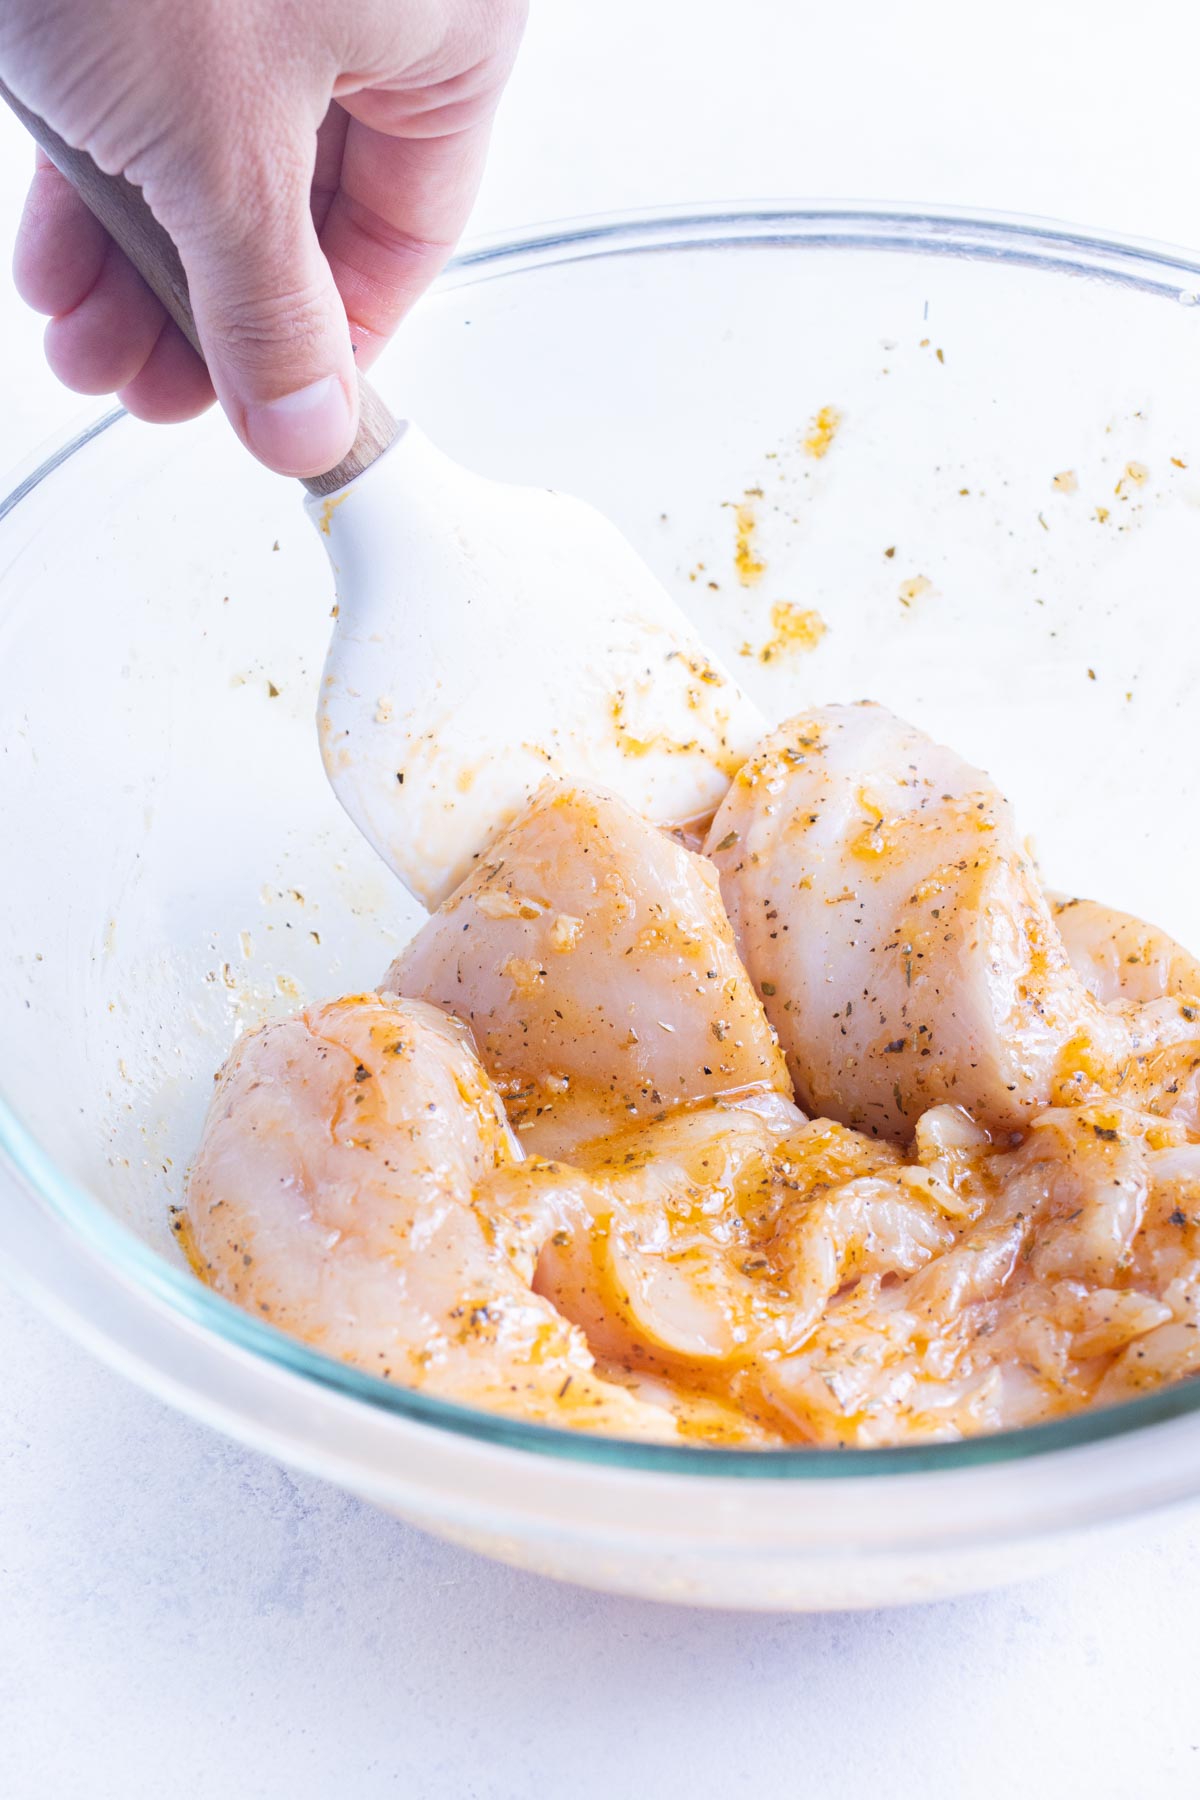 Chicken is tossed with a marinade in a glass bowl.